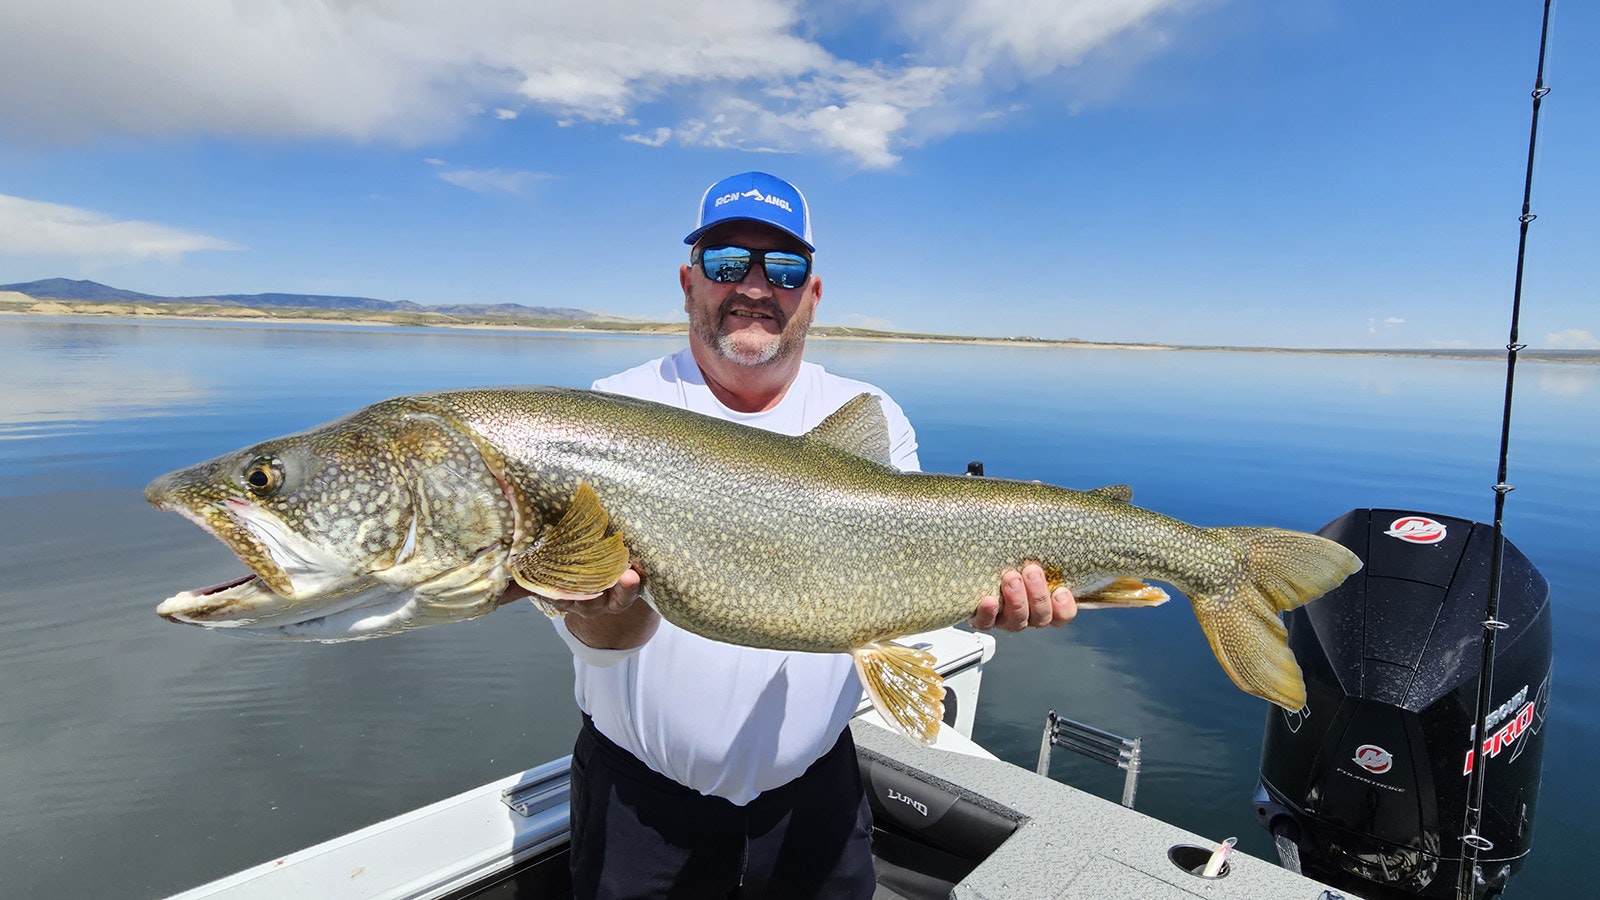 When fishermen do land decent-sized fish at Flaming Gorge Reservoir, they're obviously emaciated and starving.